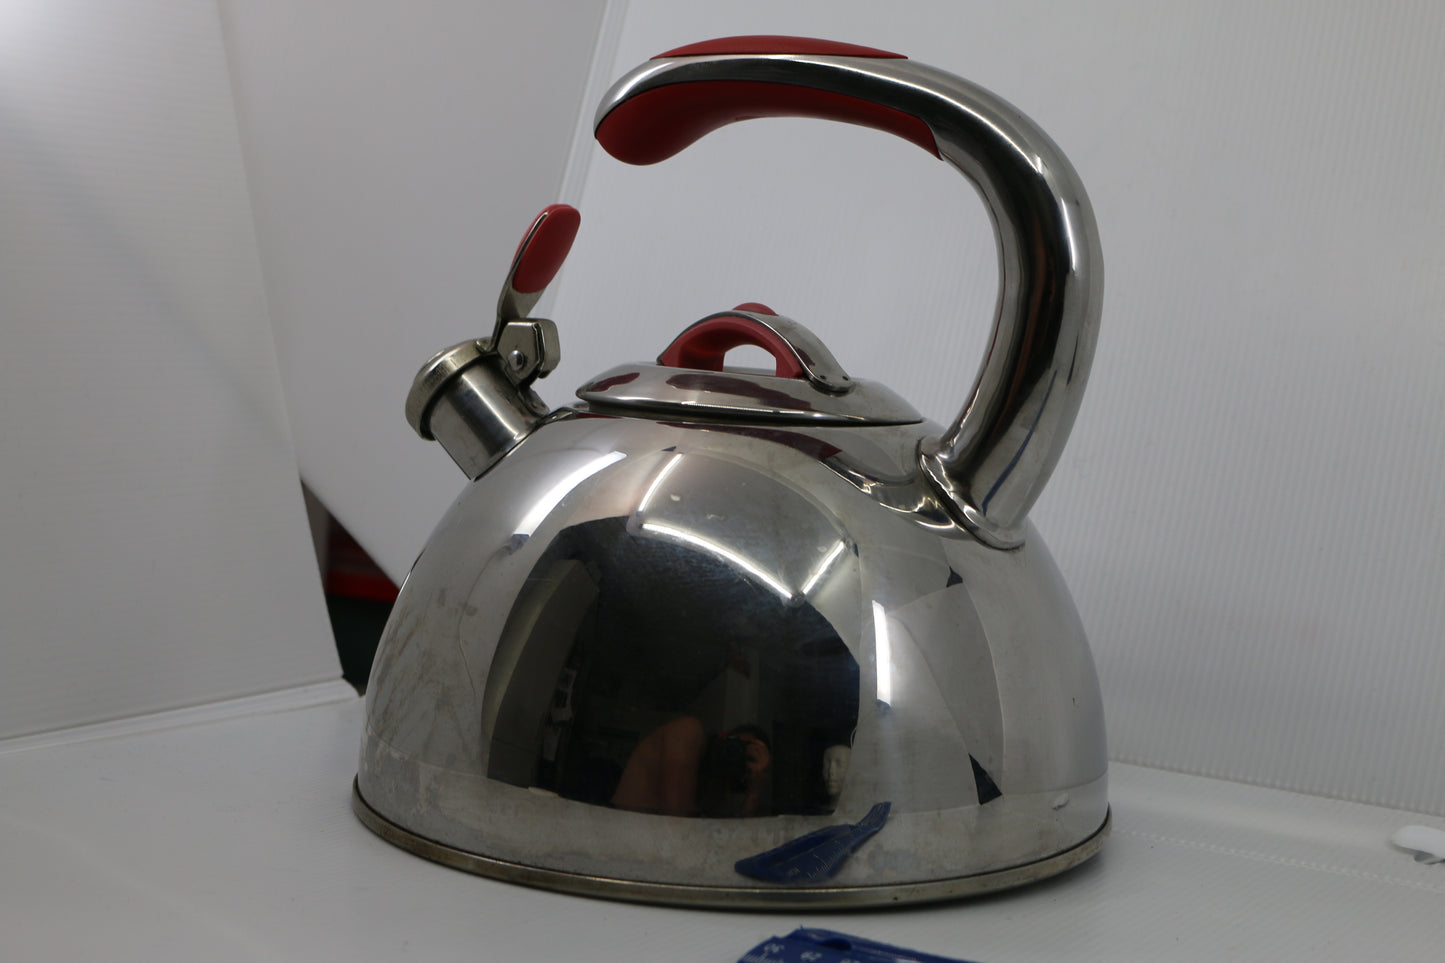 Vintage Whistling Tea Kettle / Stainless Steel/ Ted Trim Kitchen tools